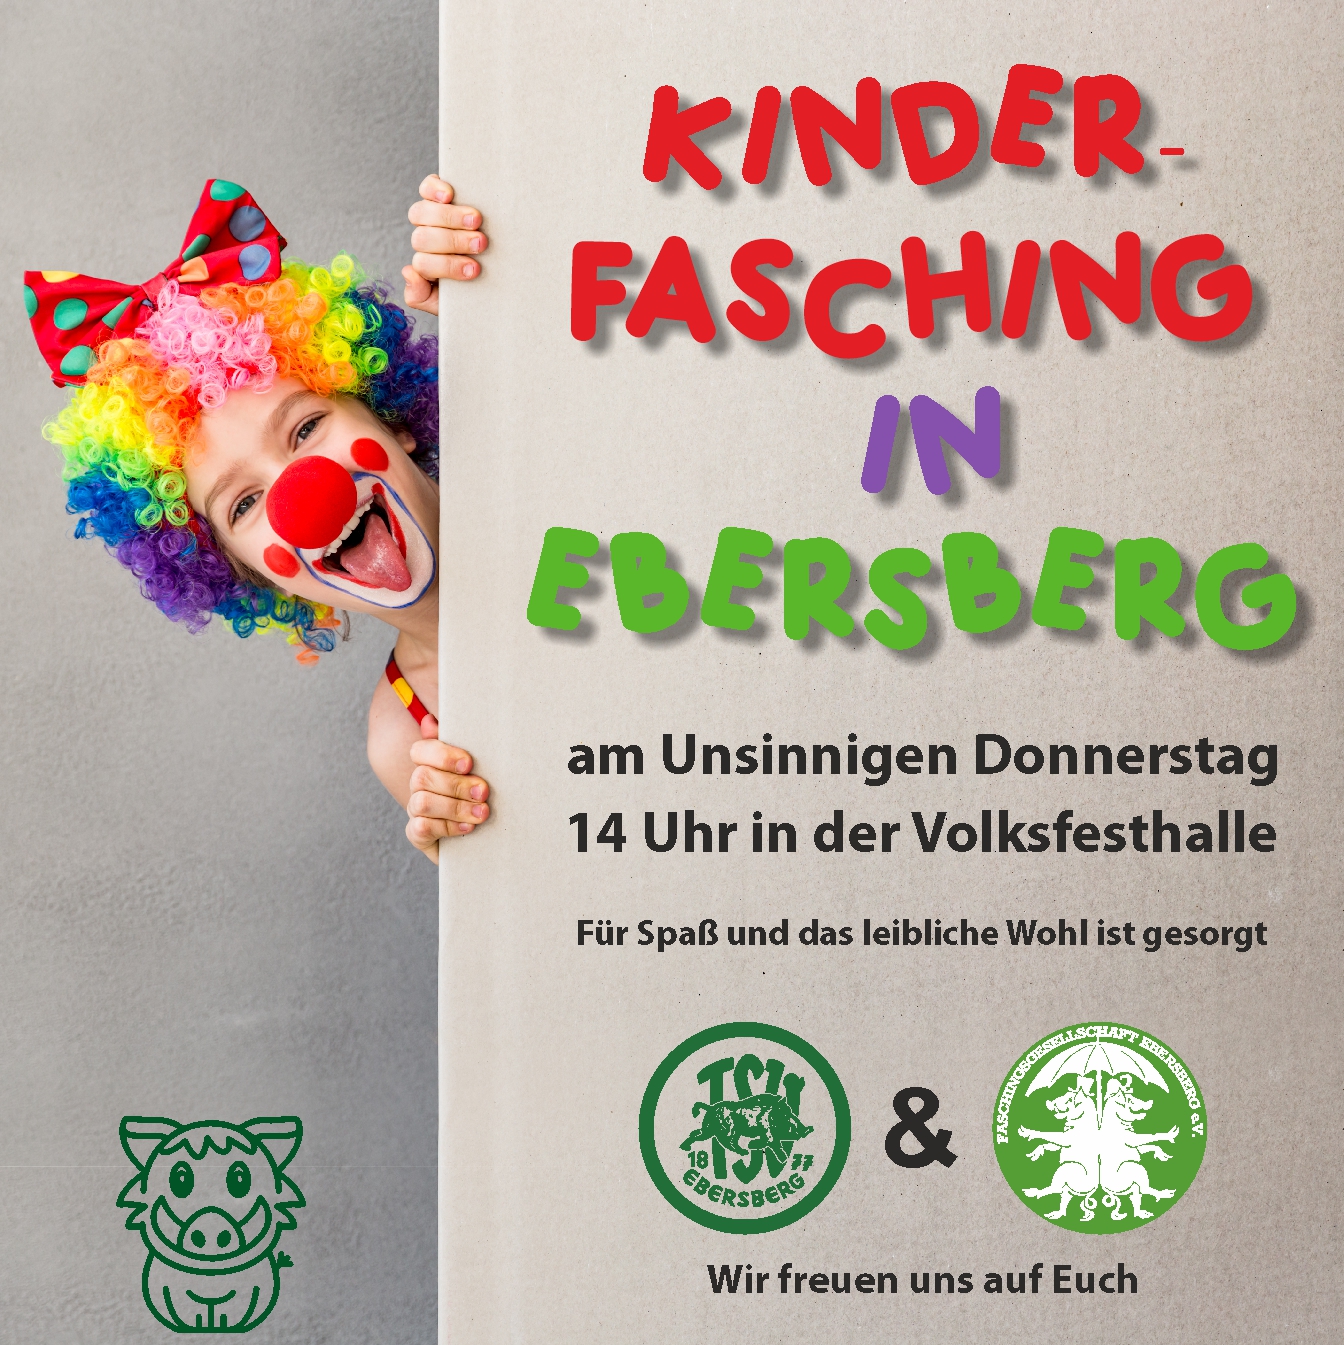 Featured image for “Kinderfasching”